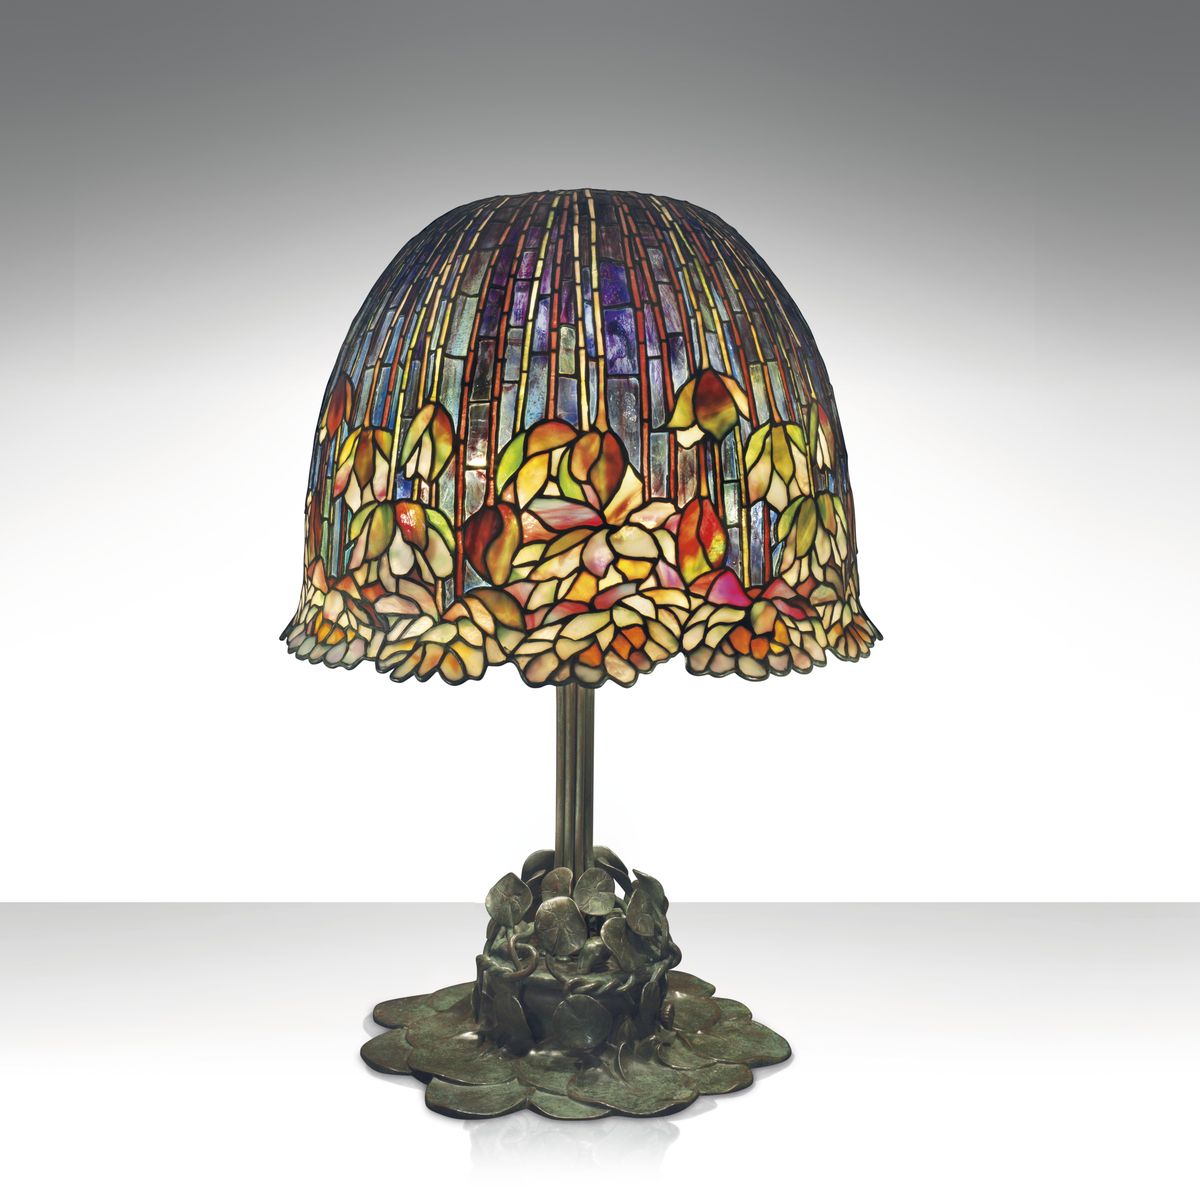 Stained glass, Lampshade, Glass, Lighting, Lighting accessory, Lamp, Light fixture, Window, Metal, 